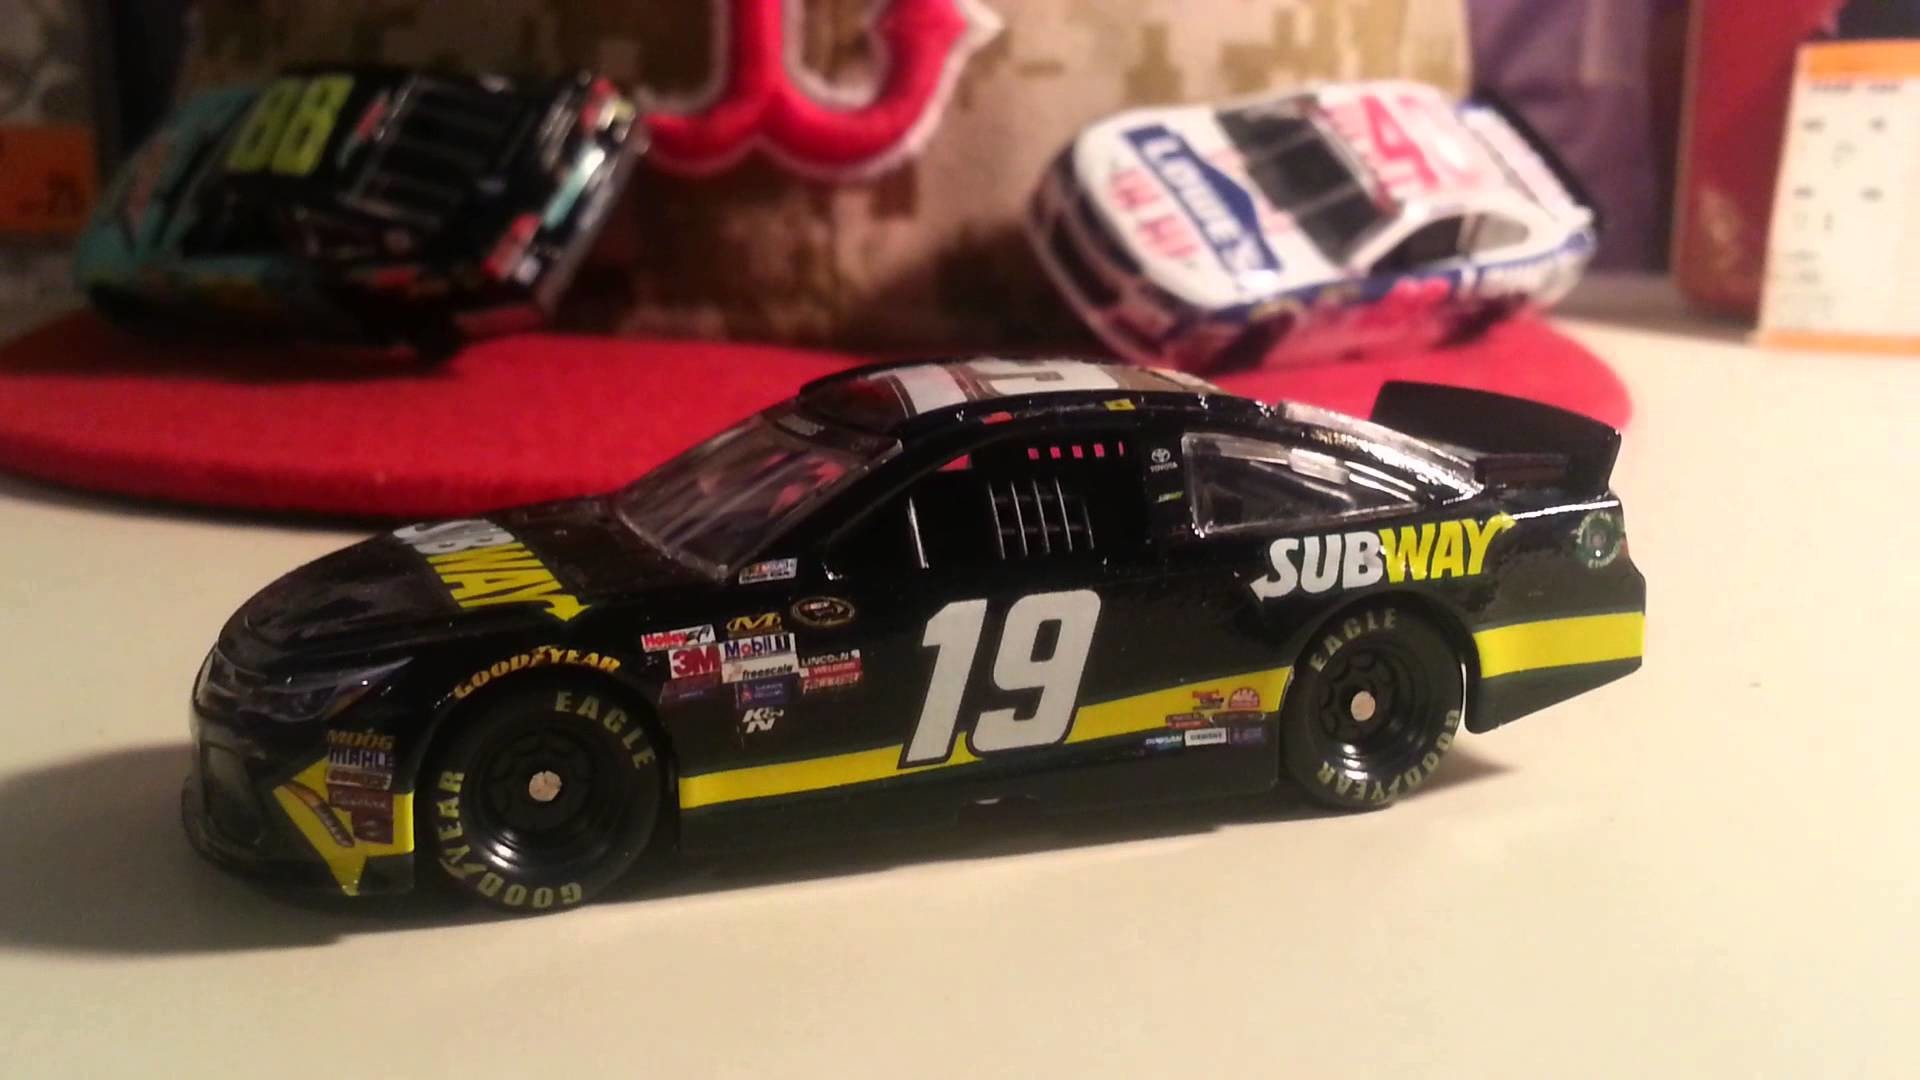 1920x1080 Diecast Review: Carl Edwards 2015 Subway 1/64